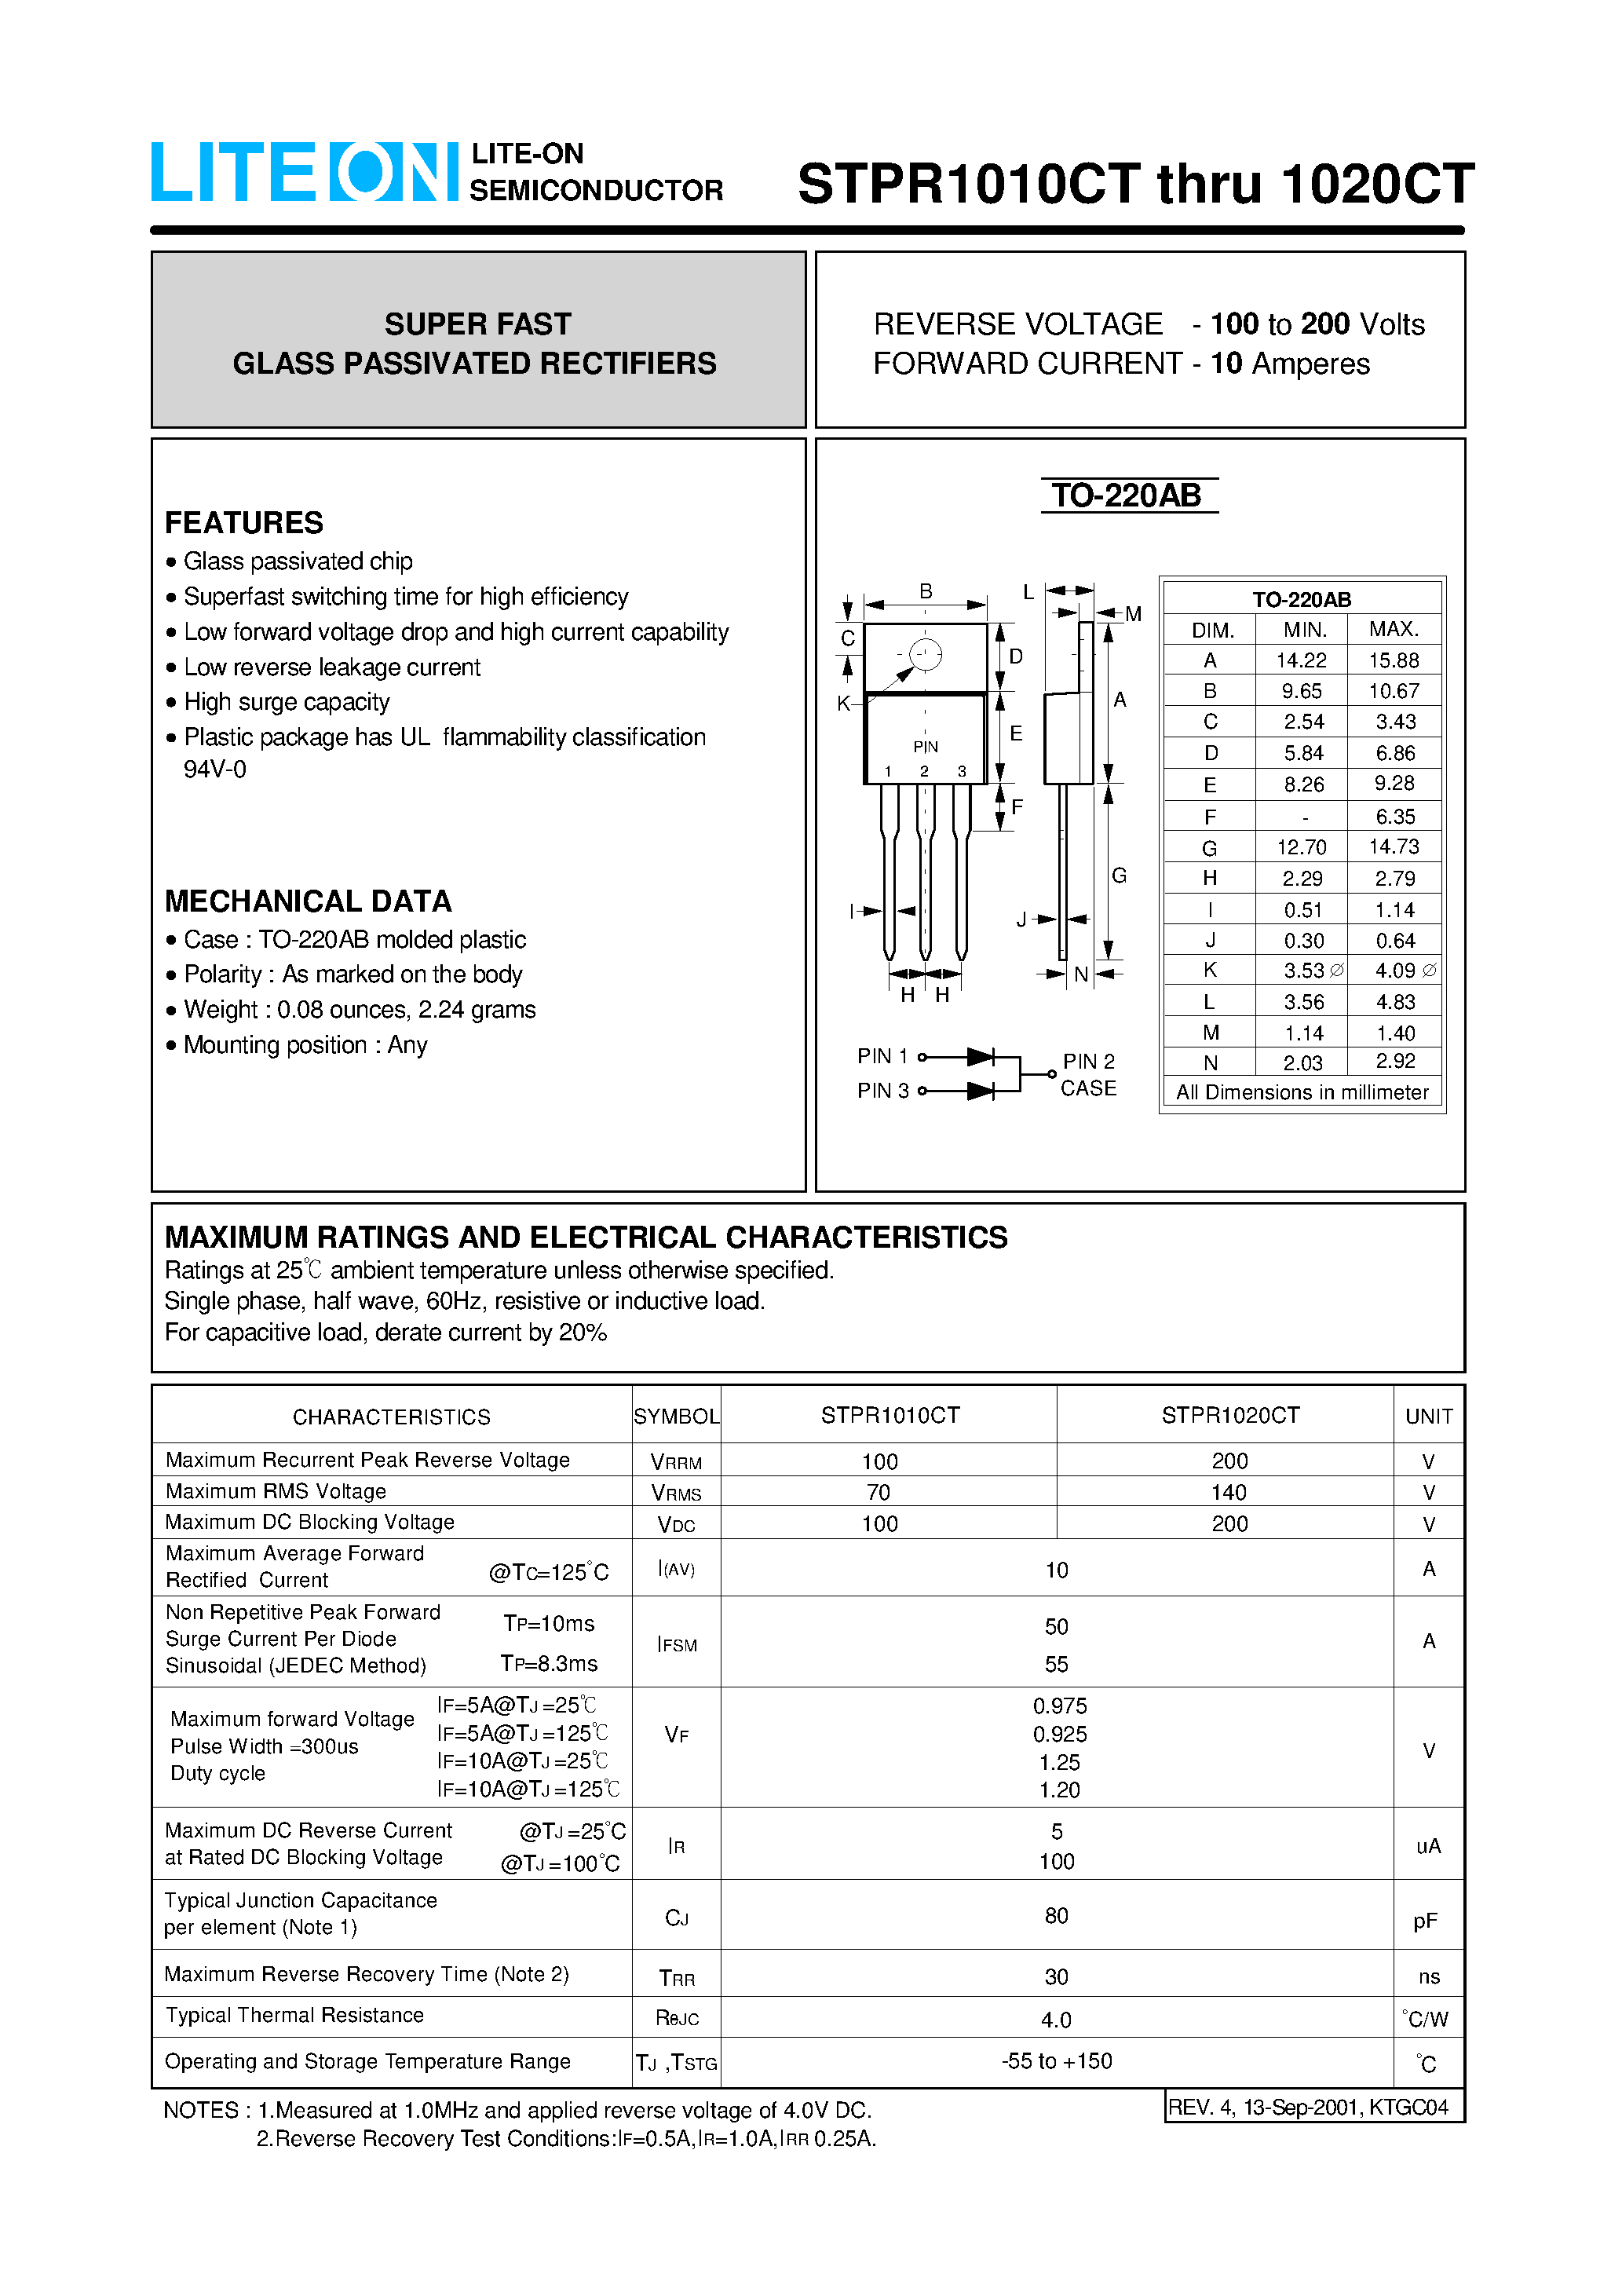 Datasheet STPR1020CT - SUPER FAST GLASS PASSIVATED RECTIFIERS page 1